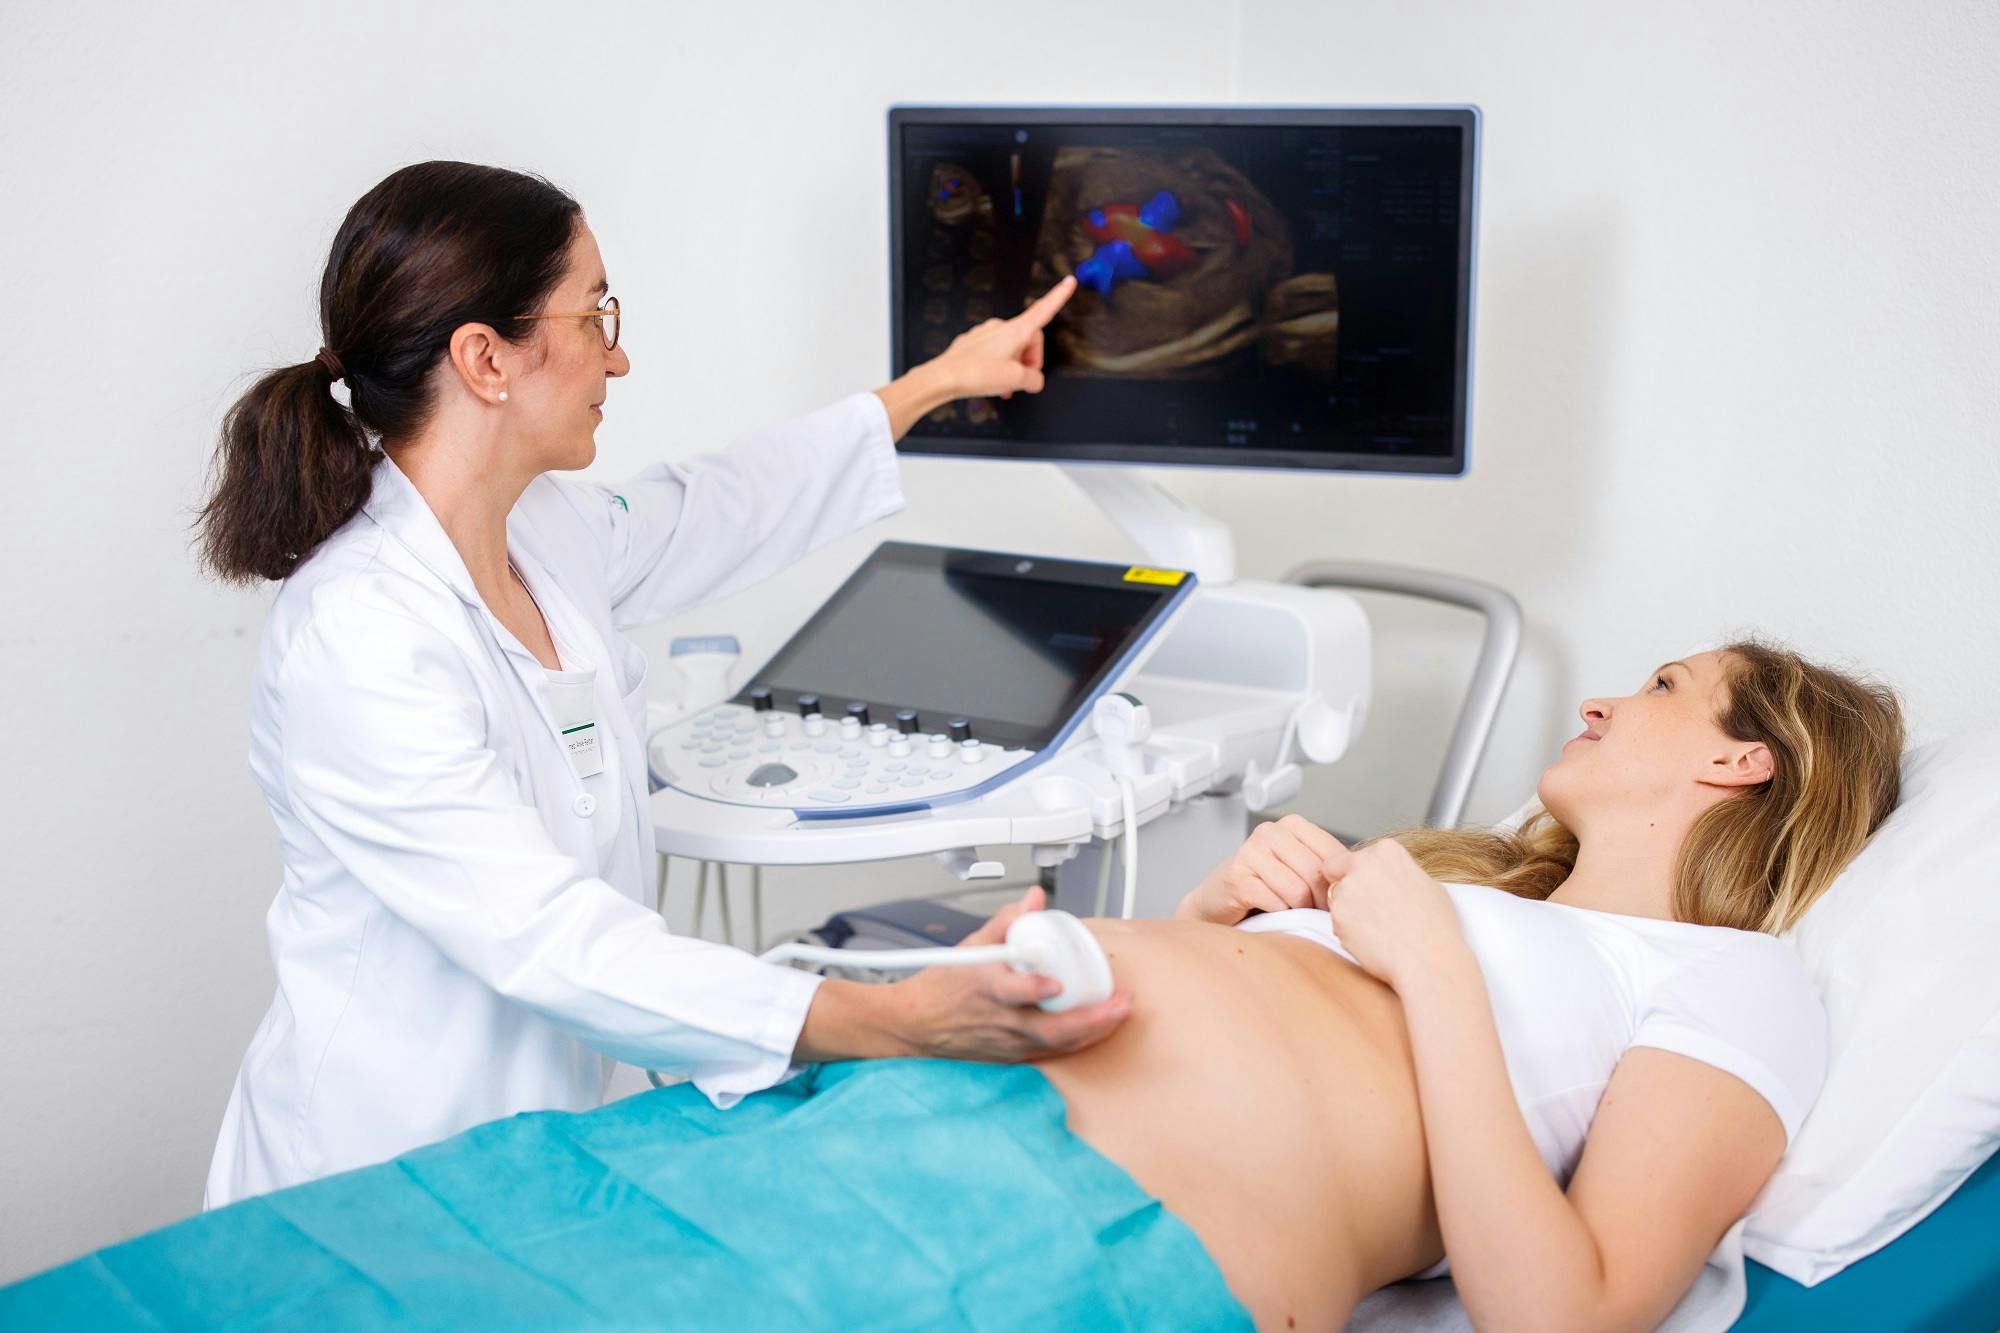 Doctor performs ultrasound examination on patient and points to ultrasound image on monitor.